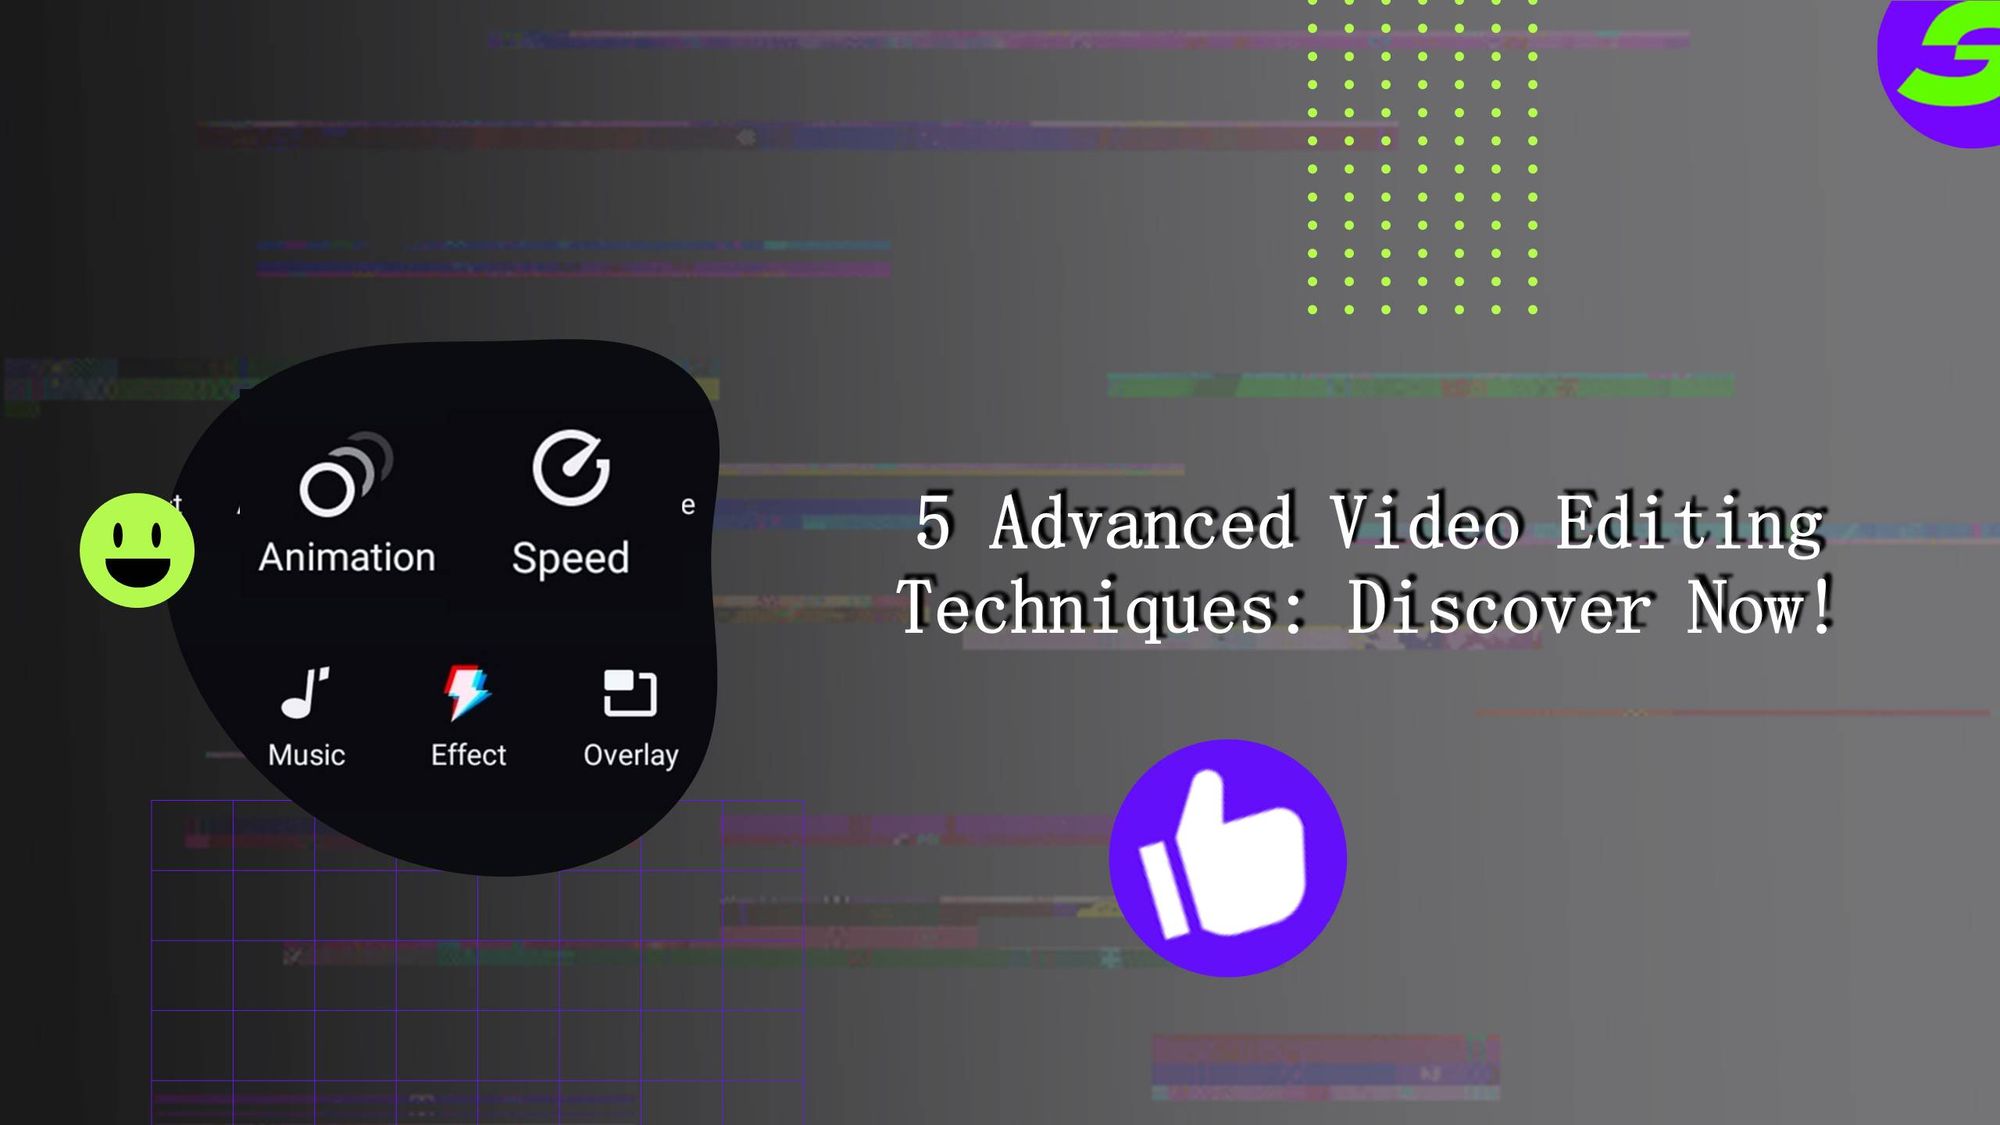 5 Advanced Video Editing Techniques: Discover Now!